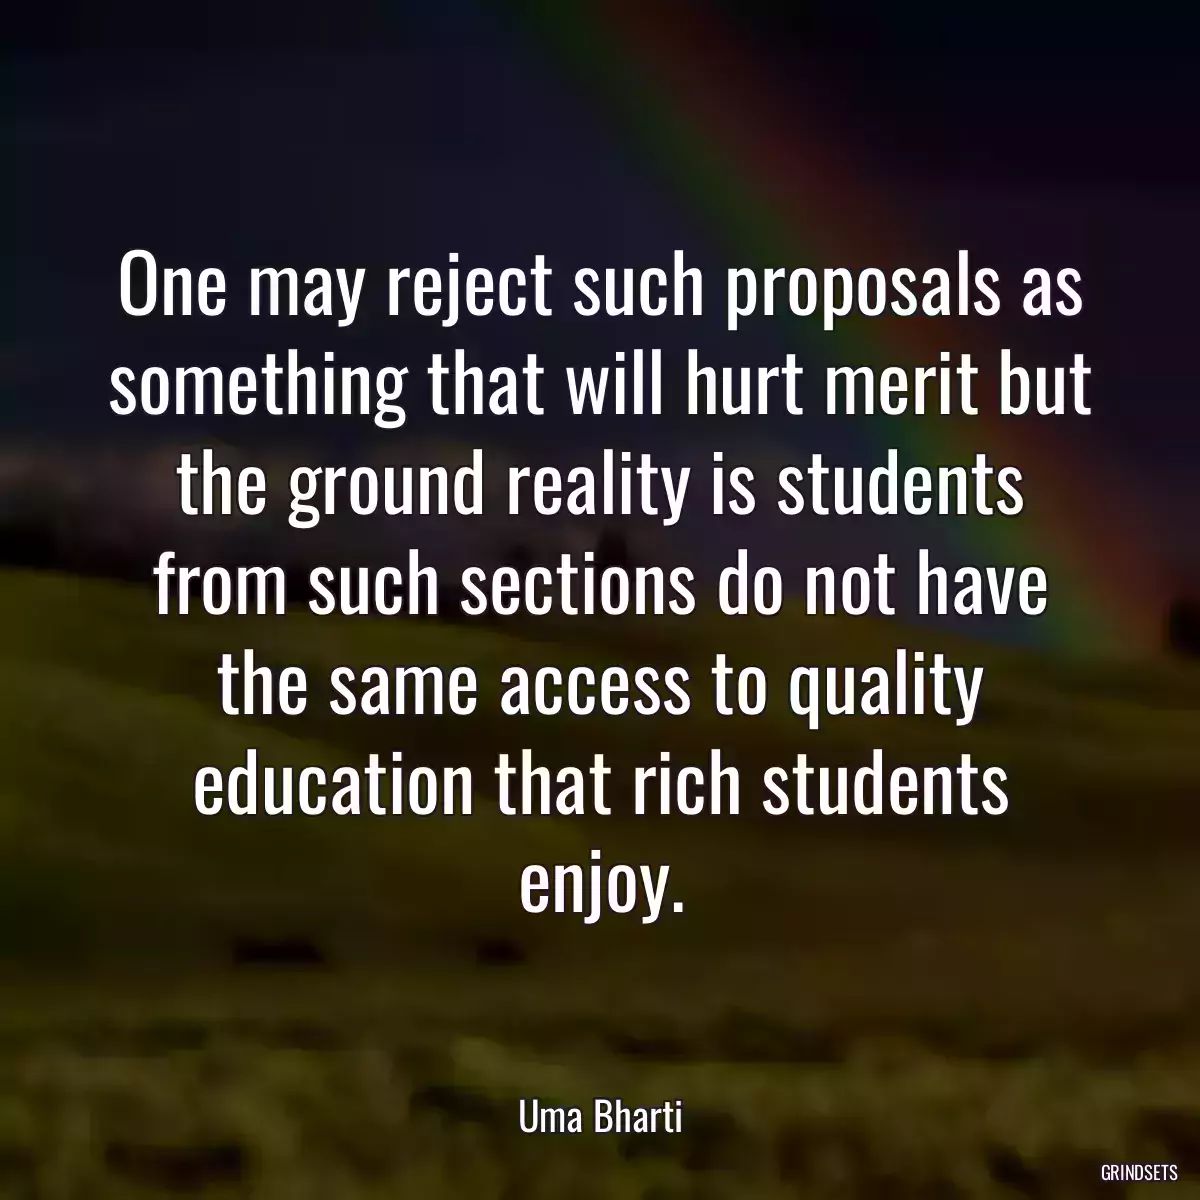 One may reject such proposals as something that will hurt merit but the ground reality is students from such sections do not have the same access to quality education that rich students enjoy.